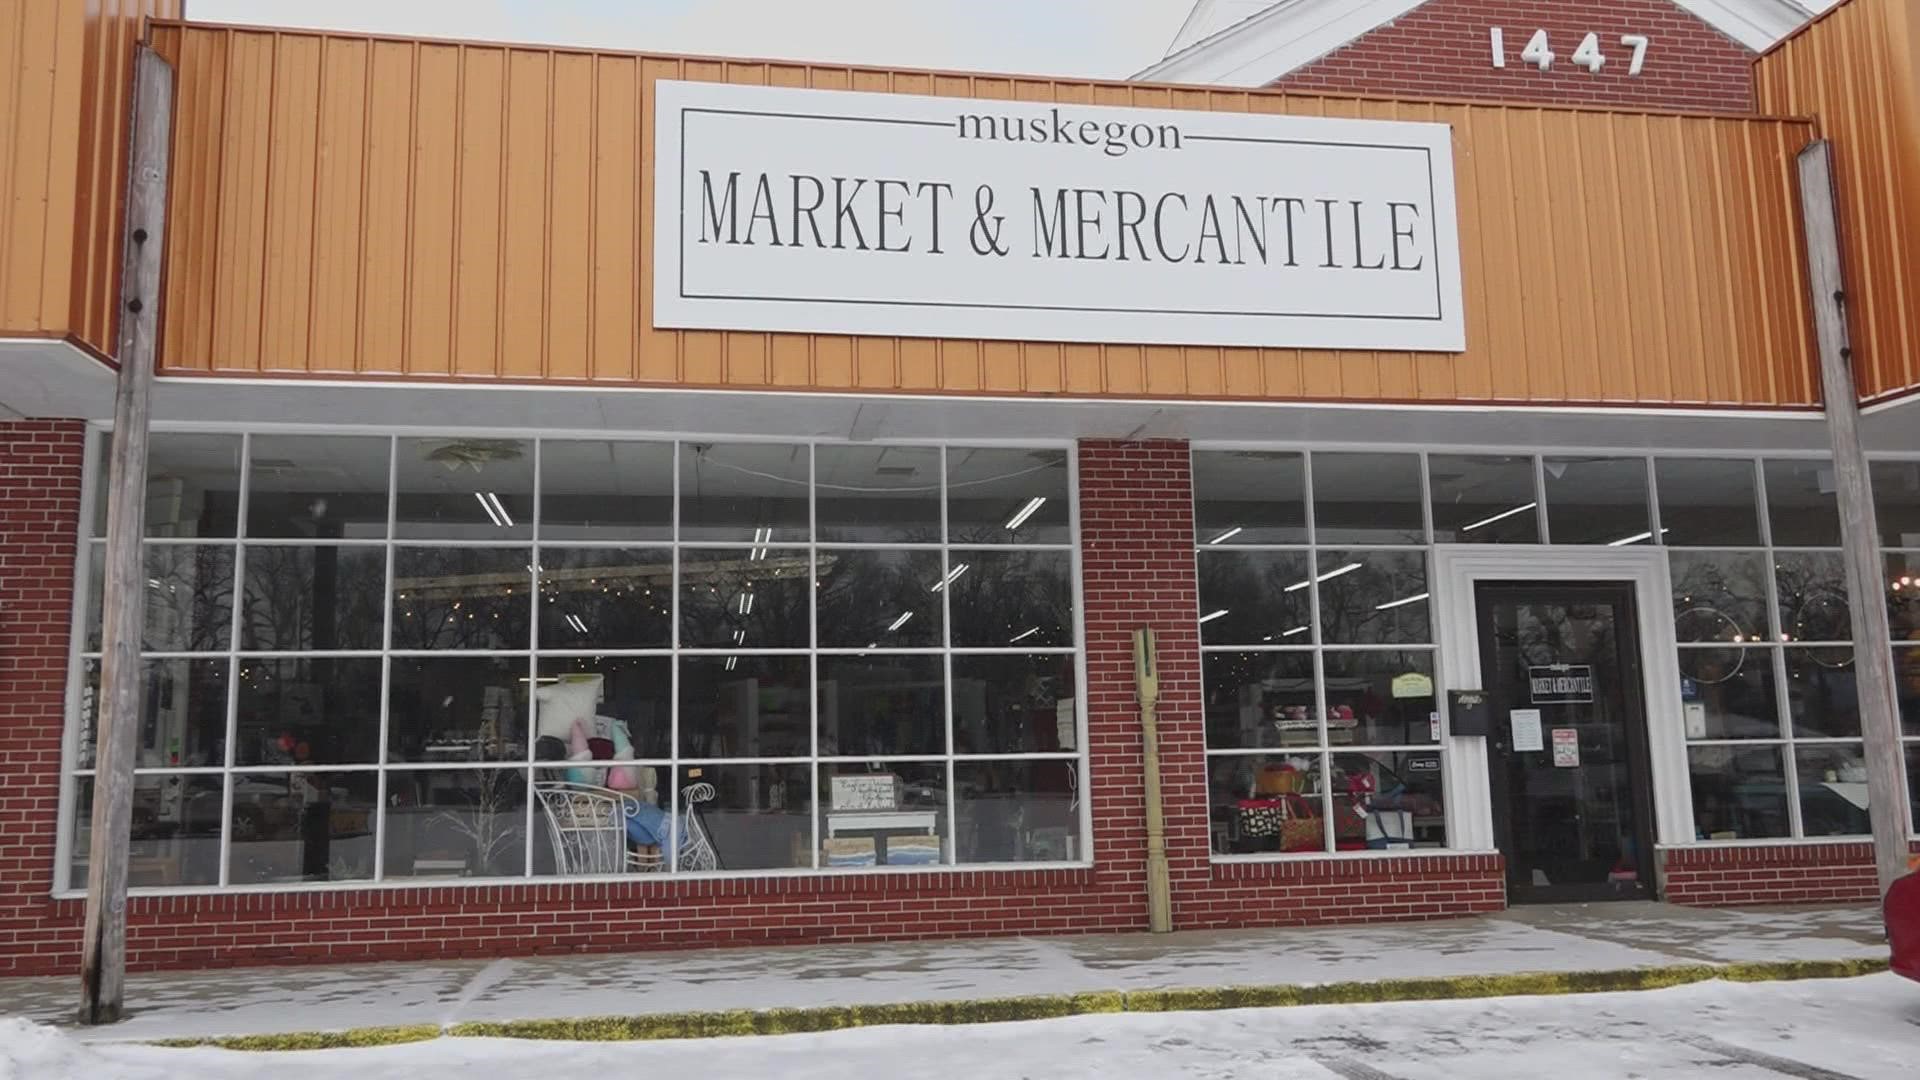 This Muskegon business features mostly handmade and Michigan-made products.